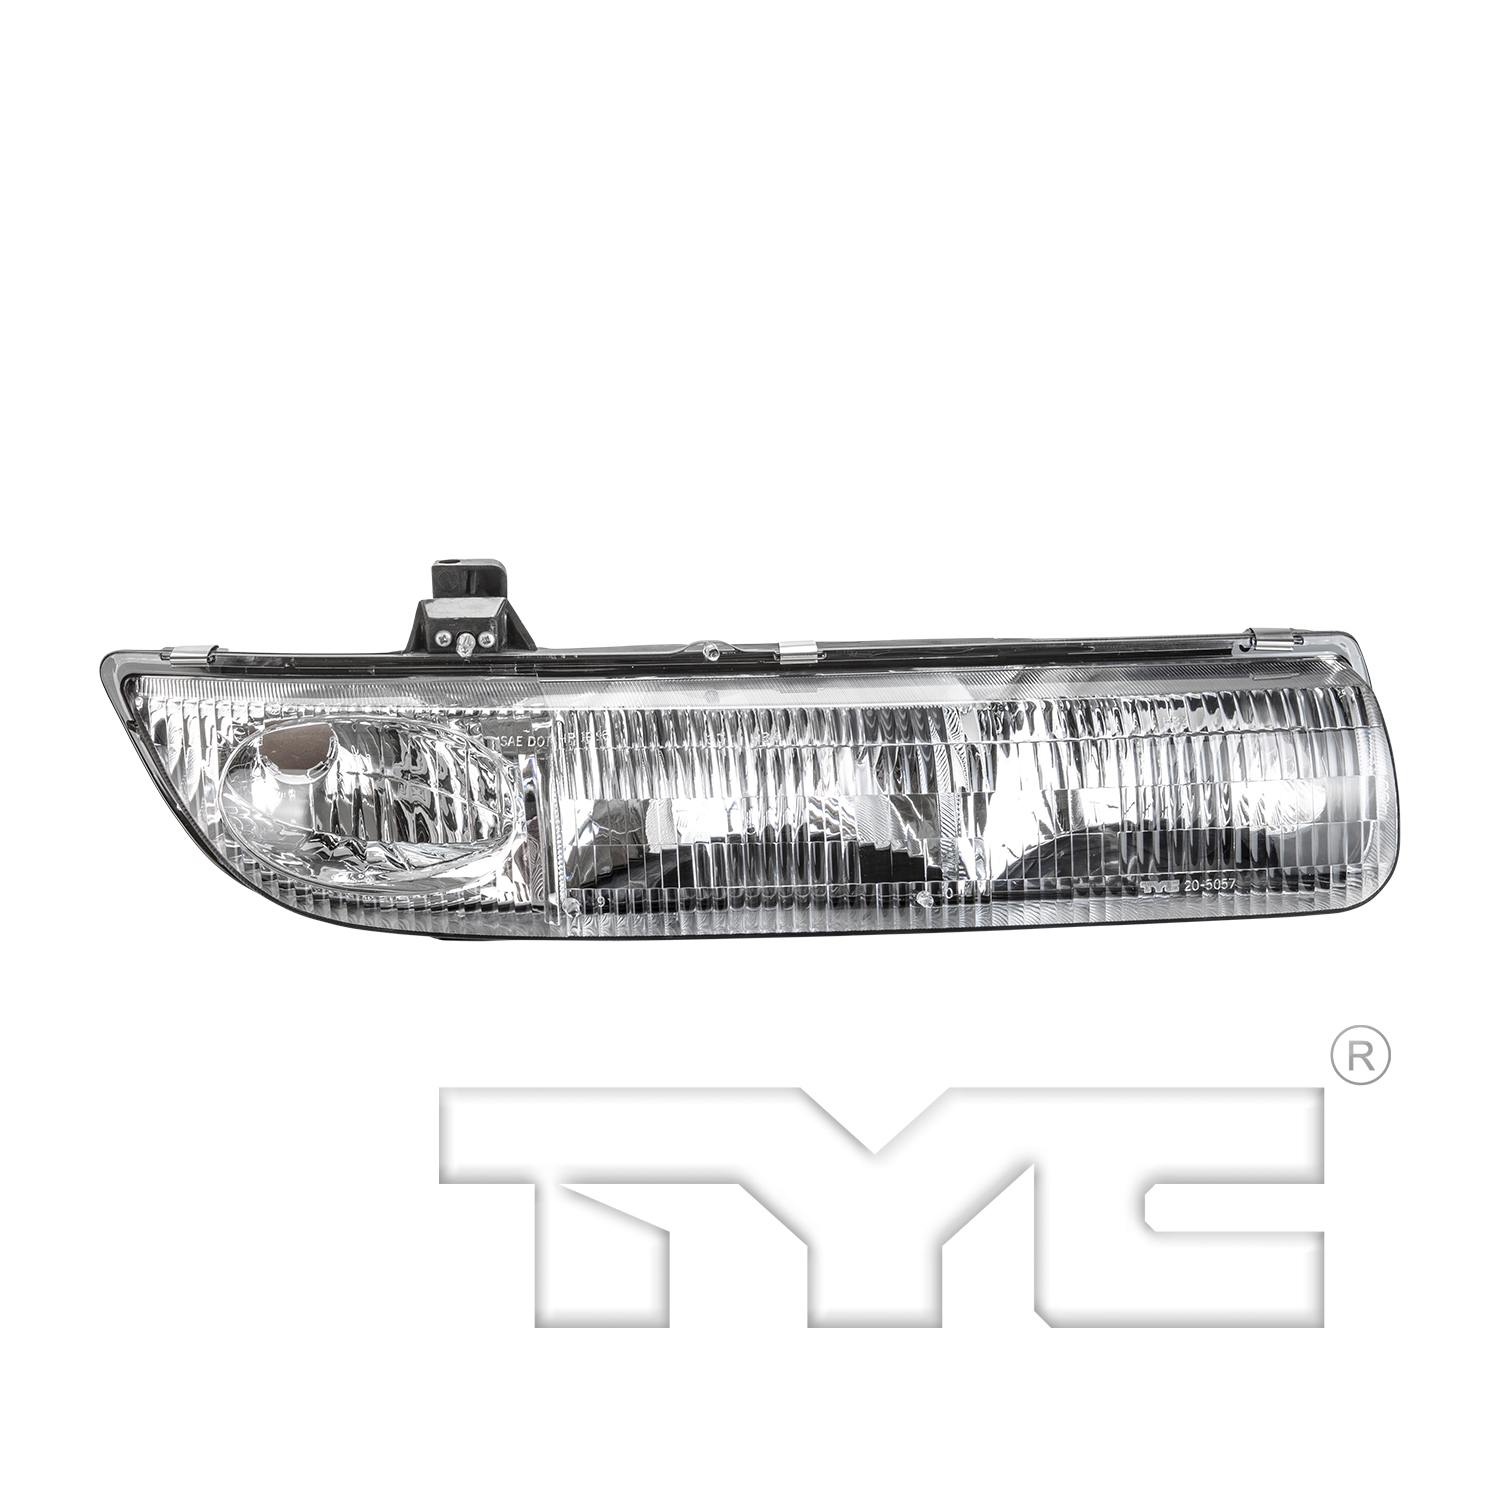 Aftermarket HEADLIGHTS for SATURN - SW1, SW1,96-99,RT Headlamp assy composite